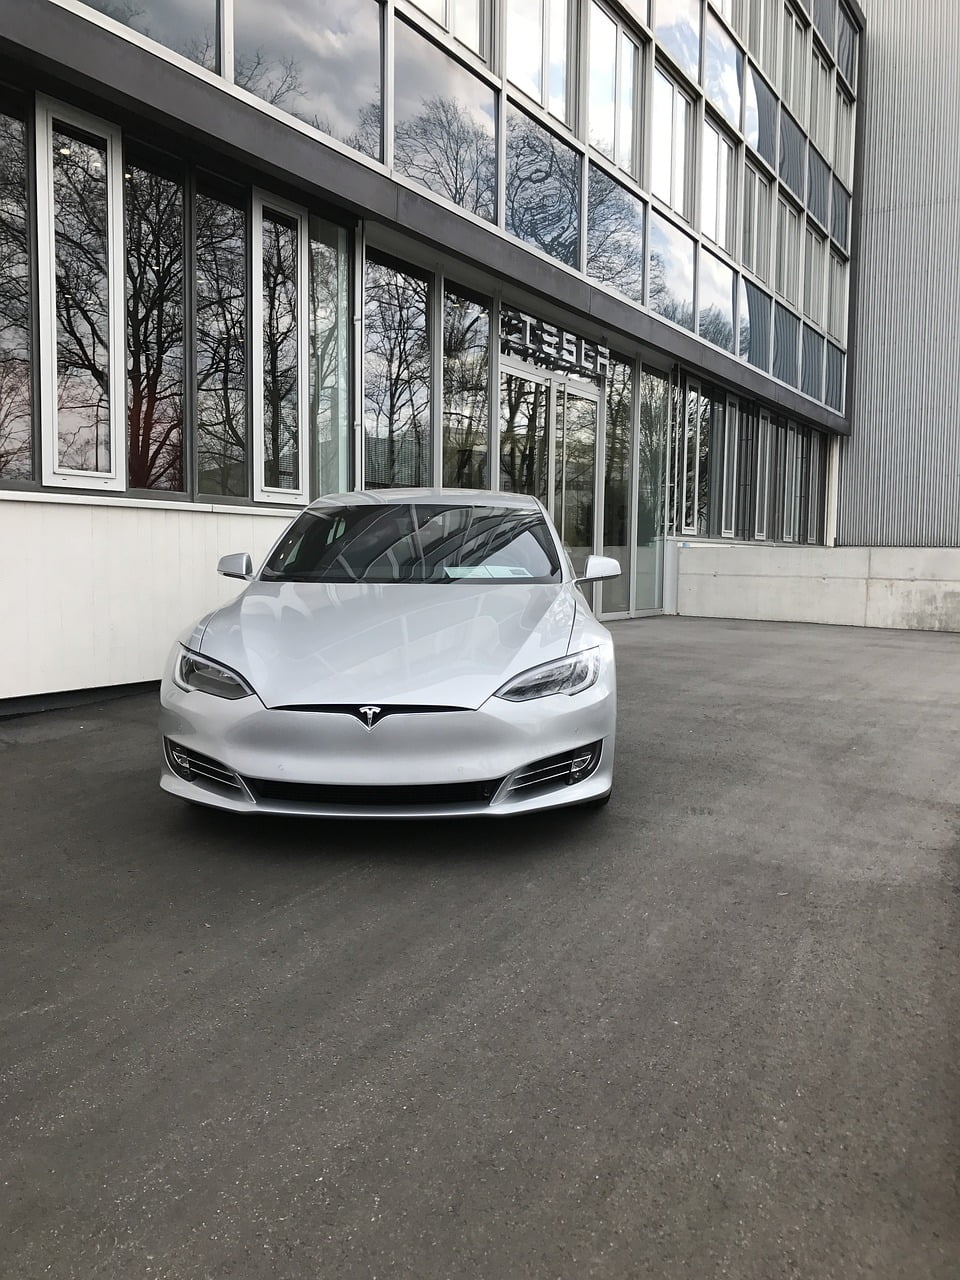 Having company-owned showrooms and selling directly to customers is another Tesla competitive advantage because it gives a better customer buying experience